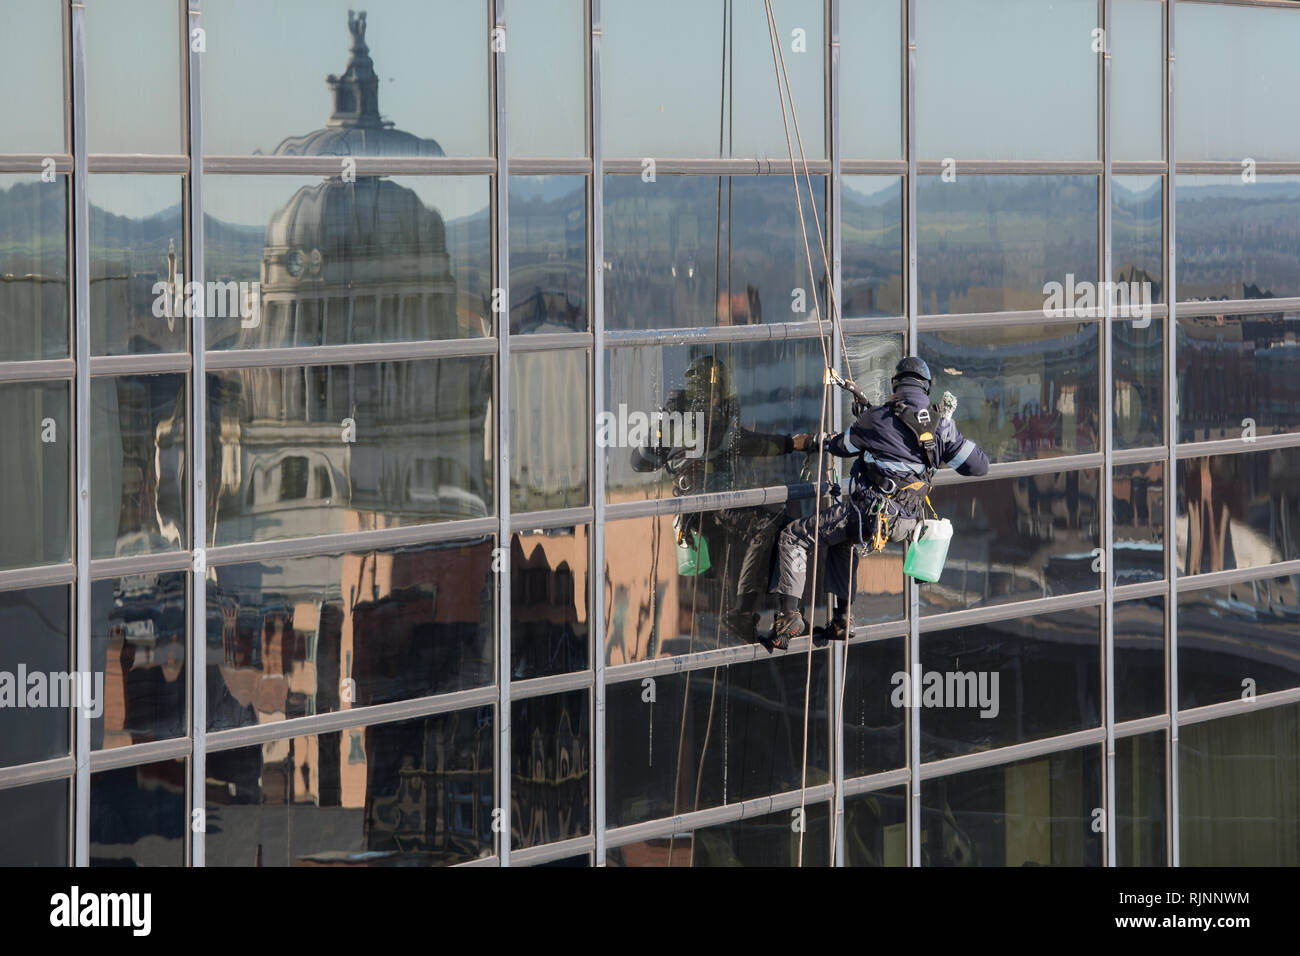 Abseiling Window Cleaner at Work with Nottingham Council House Reflecting in the Windows Stock Photo